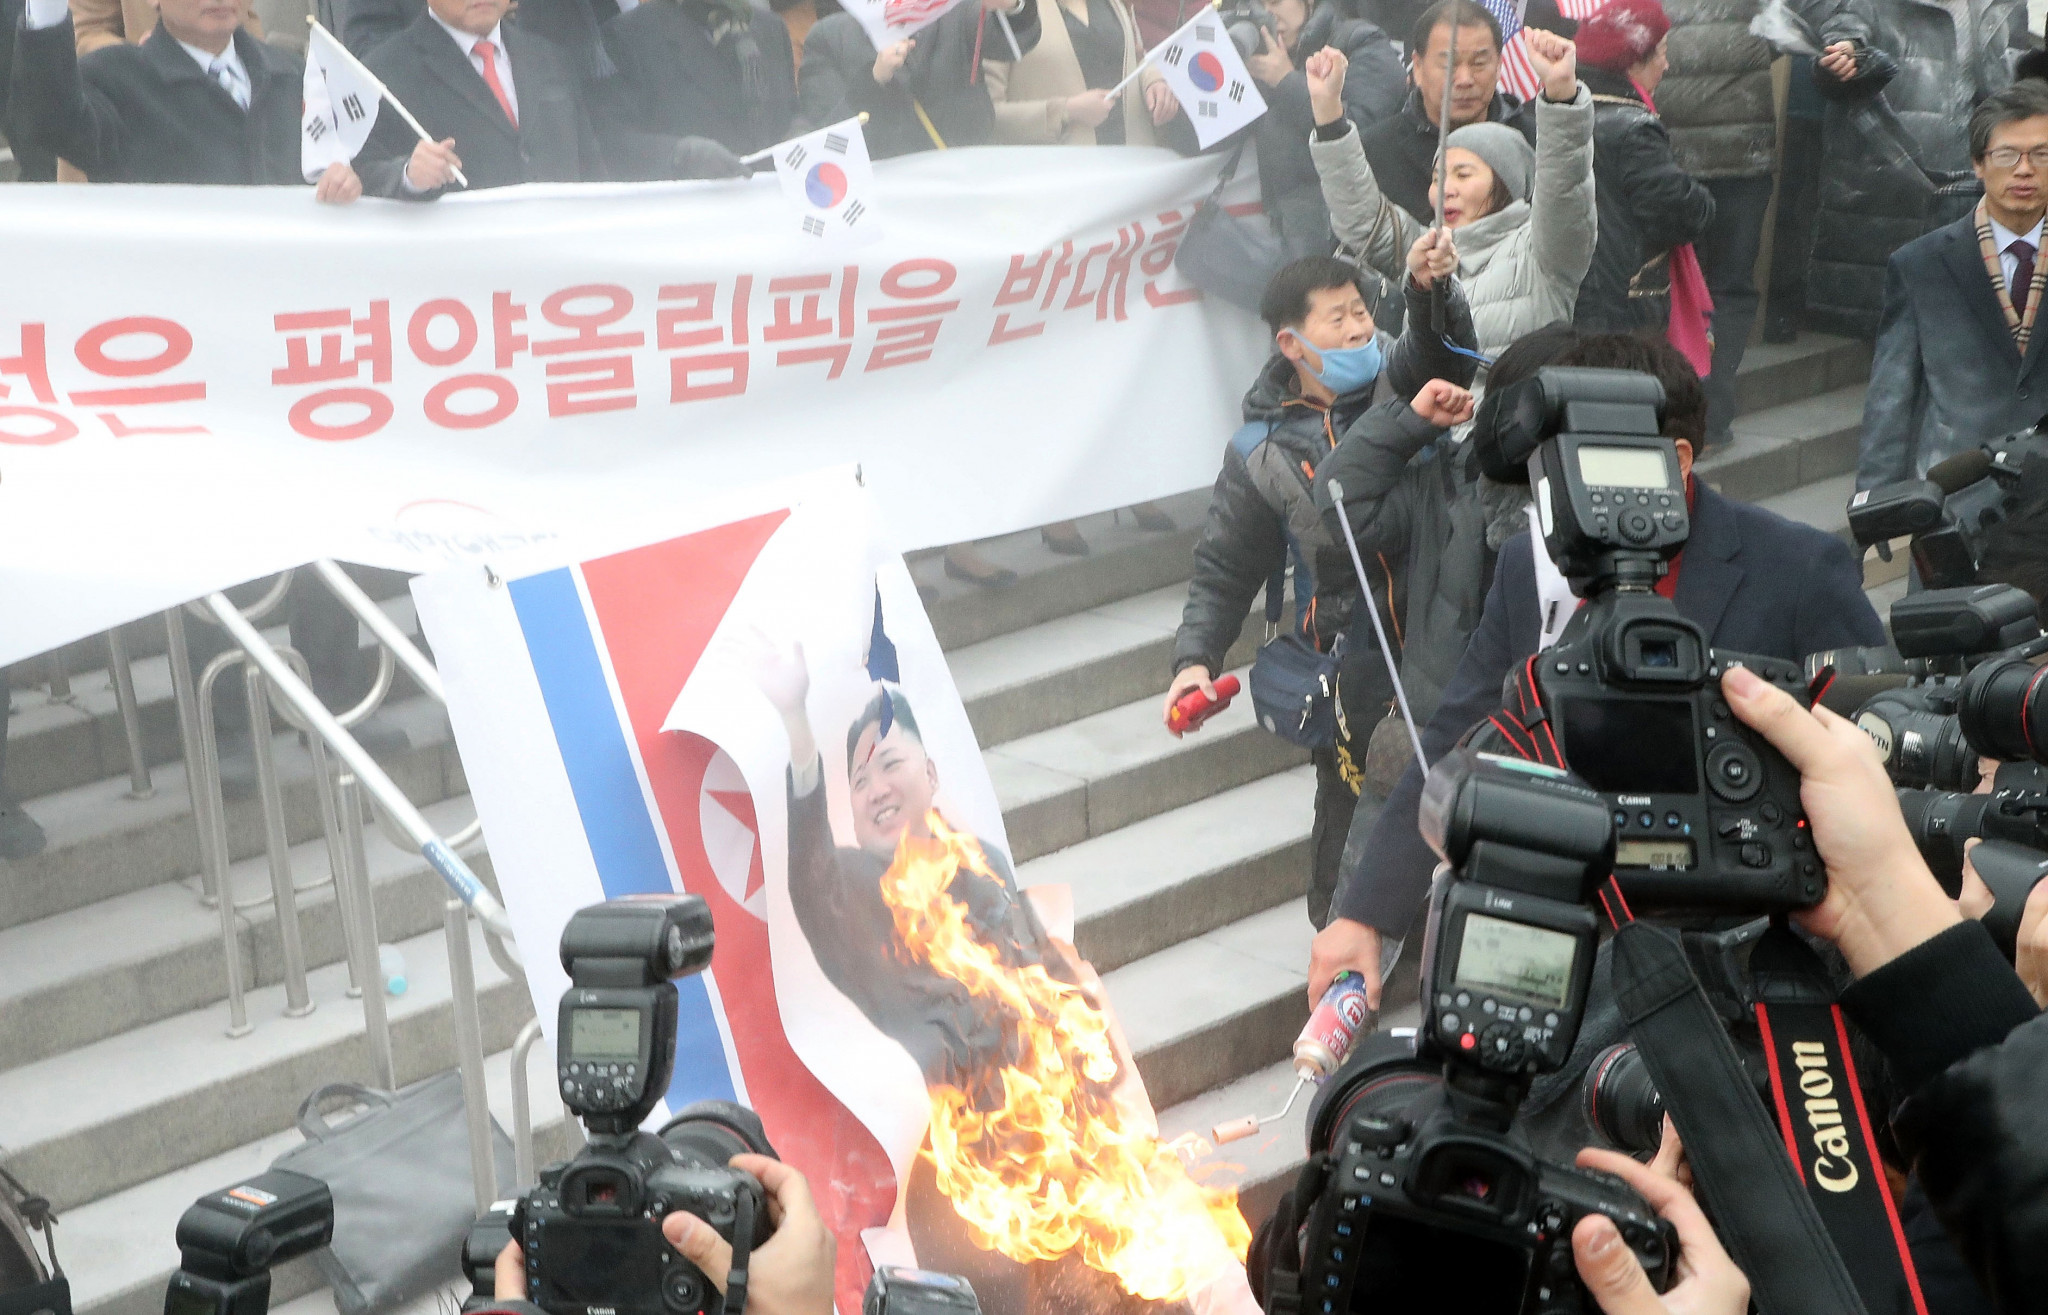 North Koreans face protest during Pyeongchang 2018 visit